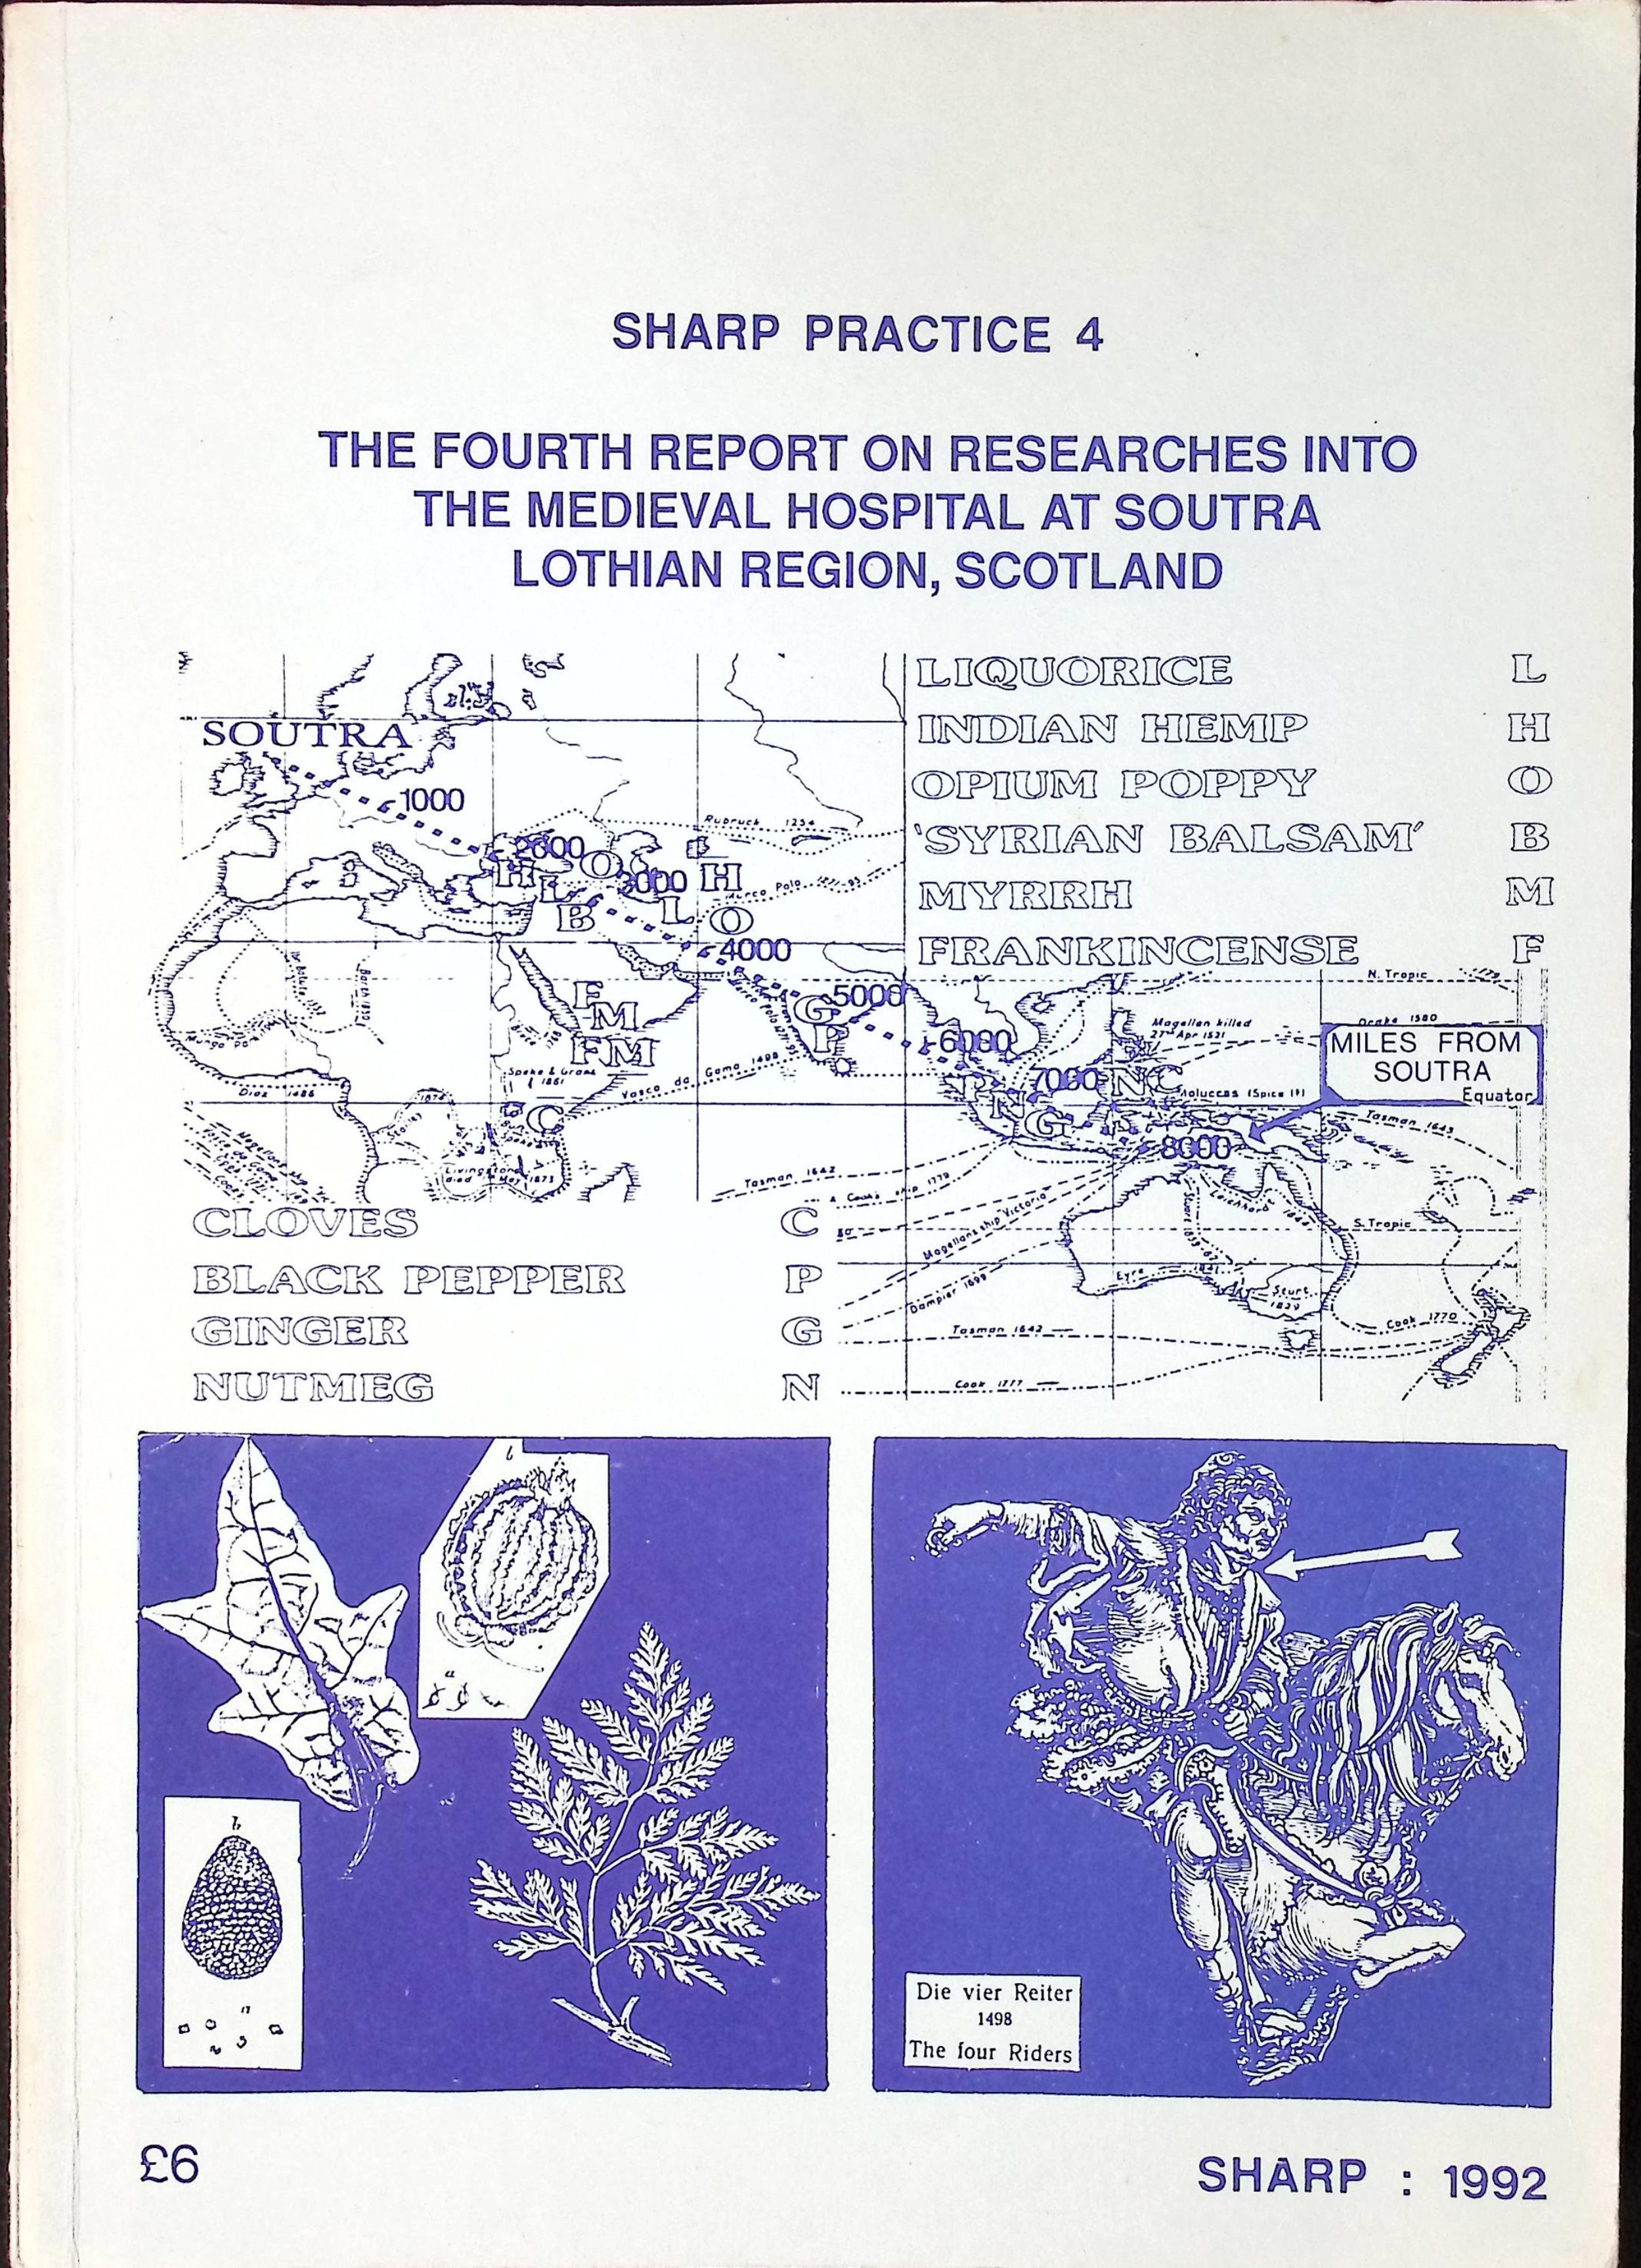 Sharp Practice 4. The Fourth Report on the Researches into the Medieval Hospital at Soutra Lothian Region, Scotland